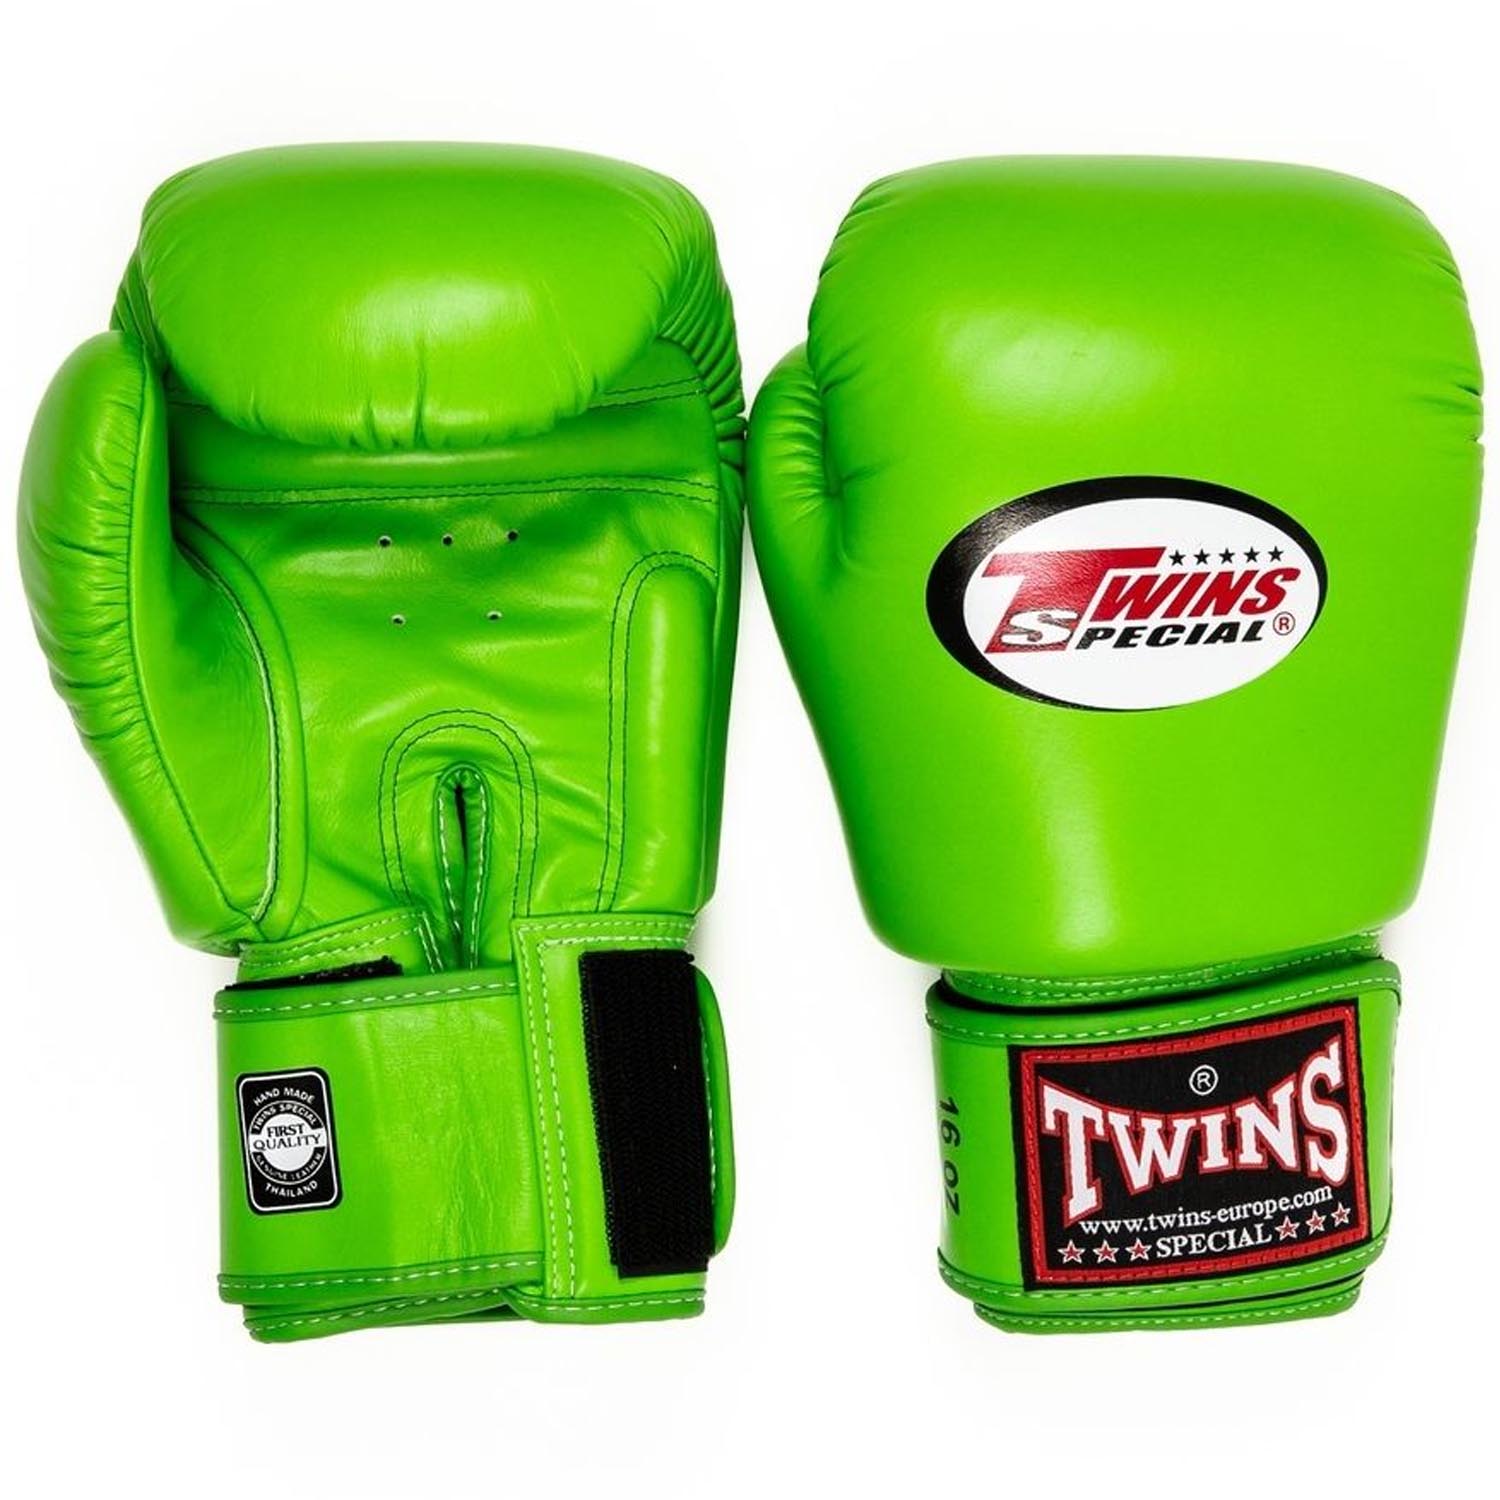 TWINS Special Boxing Gloves, BGBL3, lime, 16 Oz